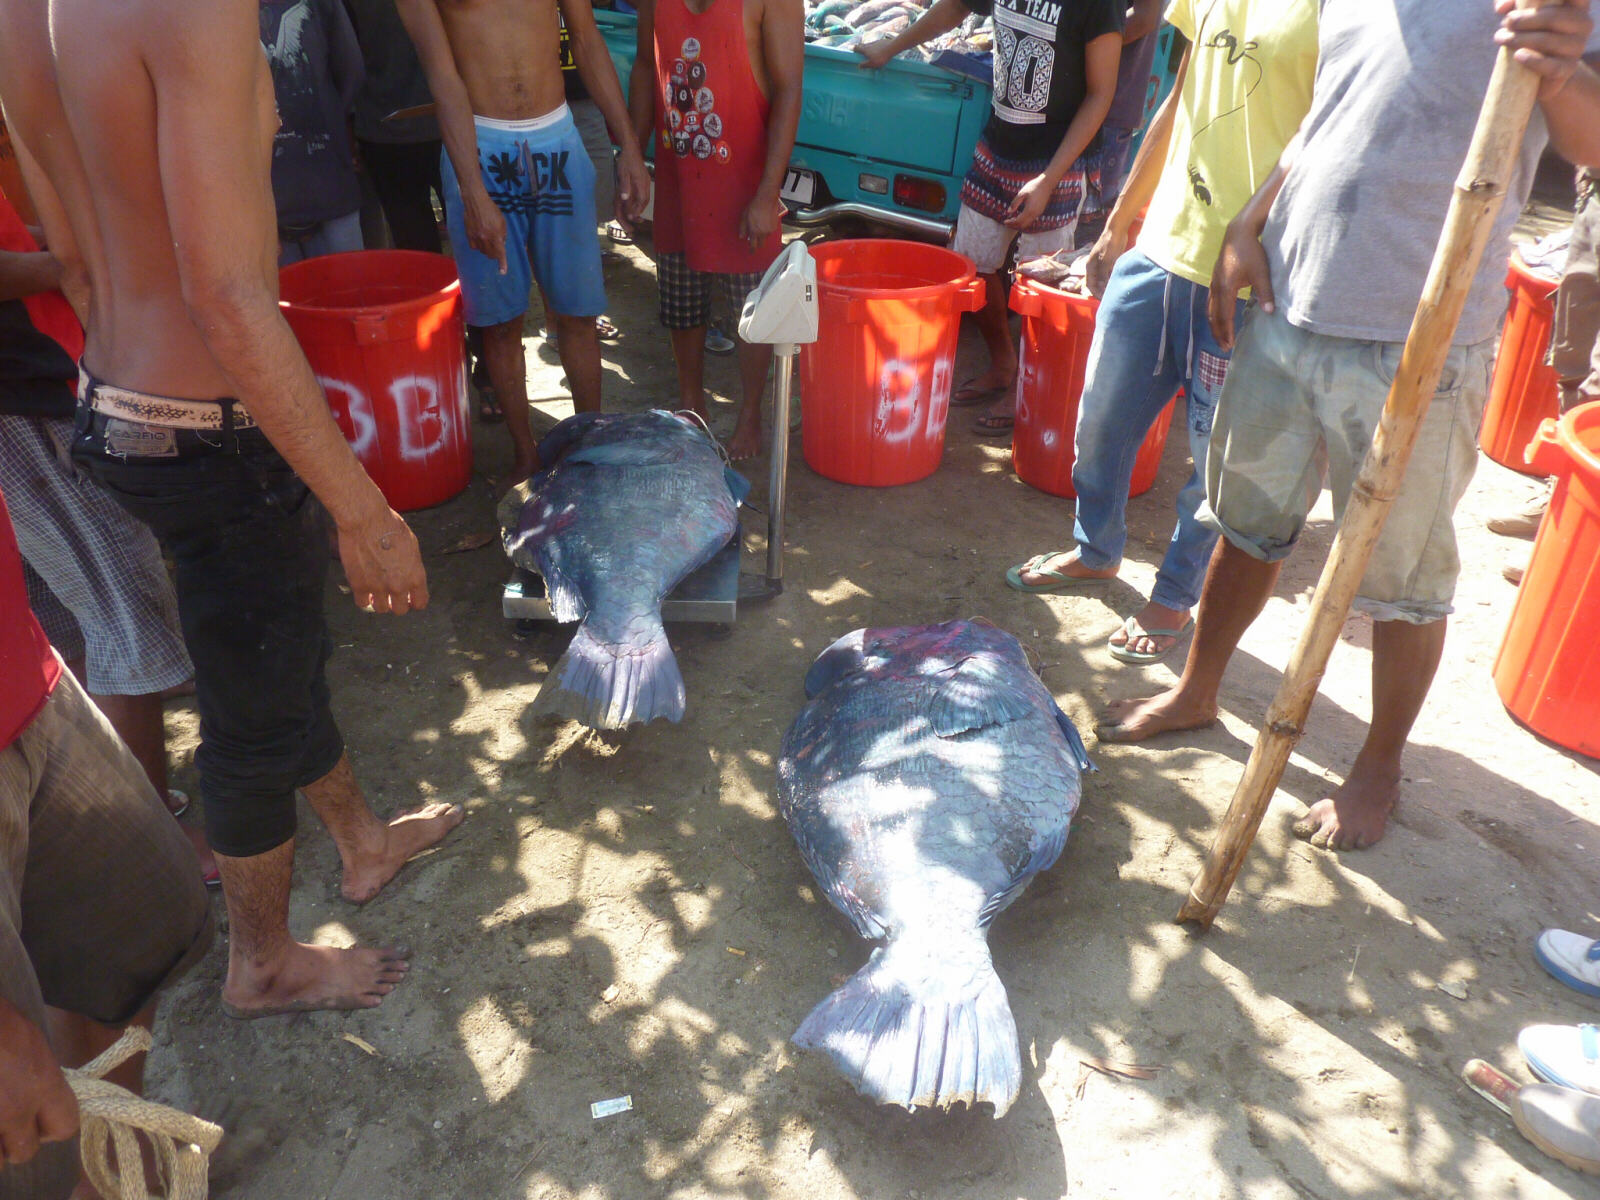 Fish for sale on the beach at Dili, Timor-Leste (East Timor)